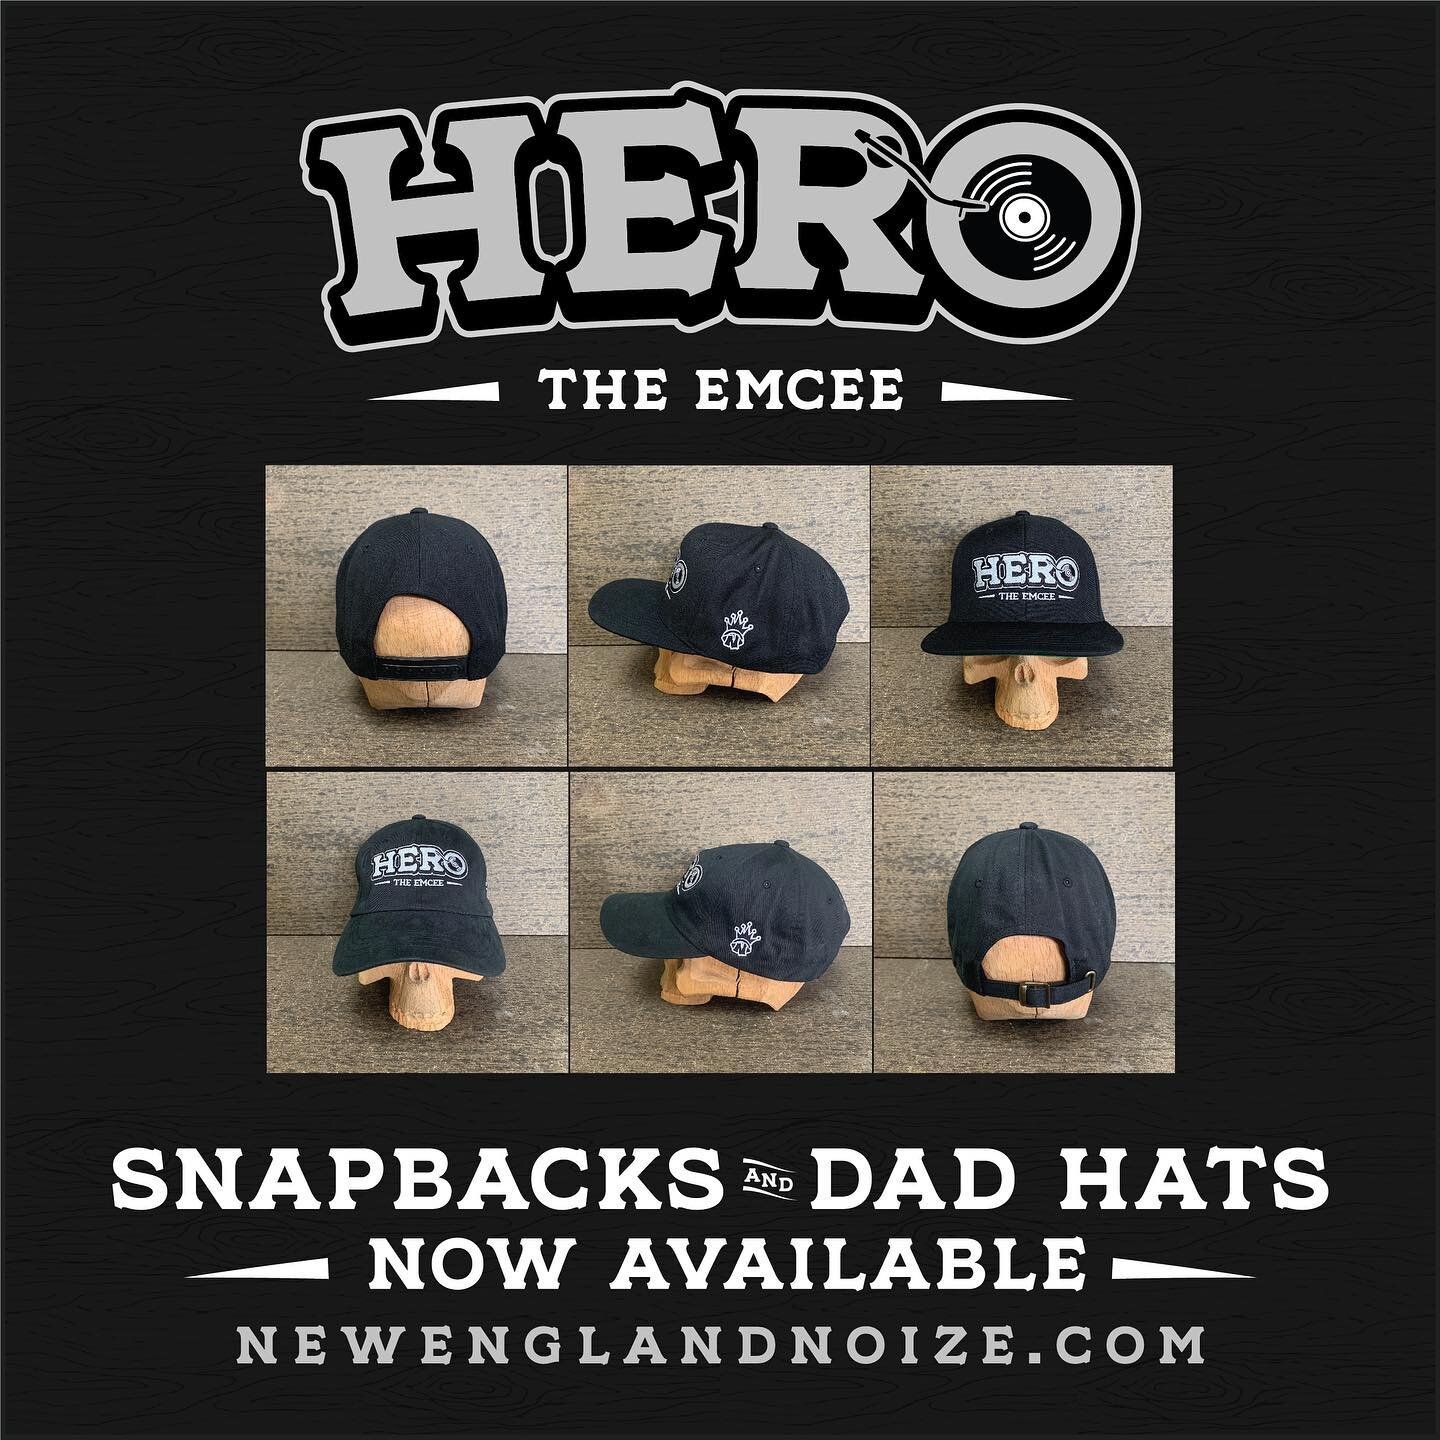 @herotheemcee SnapBack &amp; Dad Hats now available at NewEnglandNoize.com